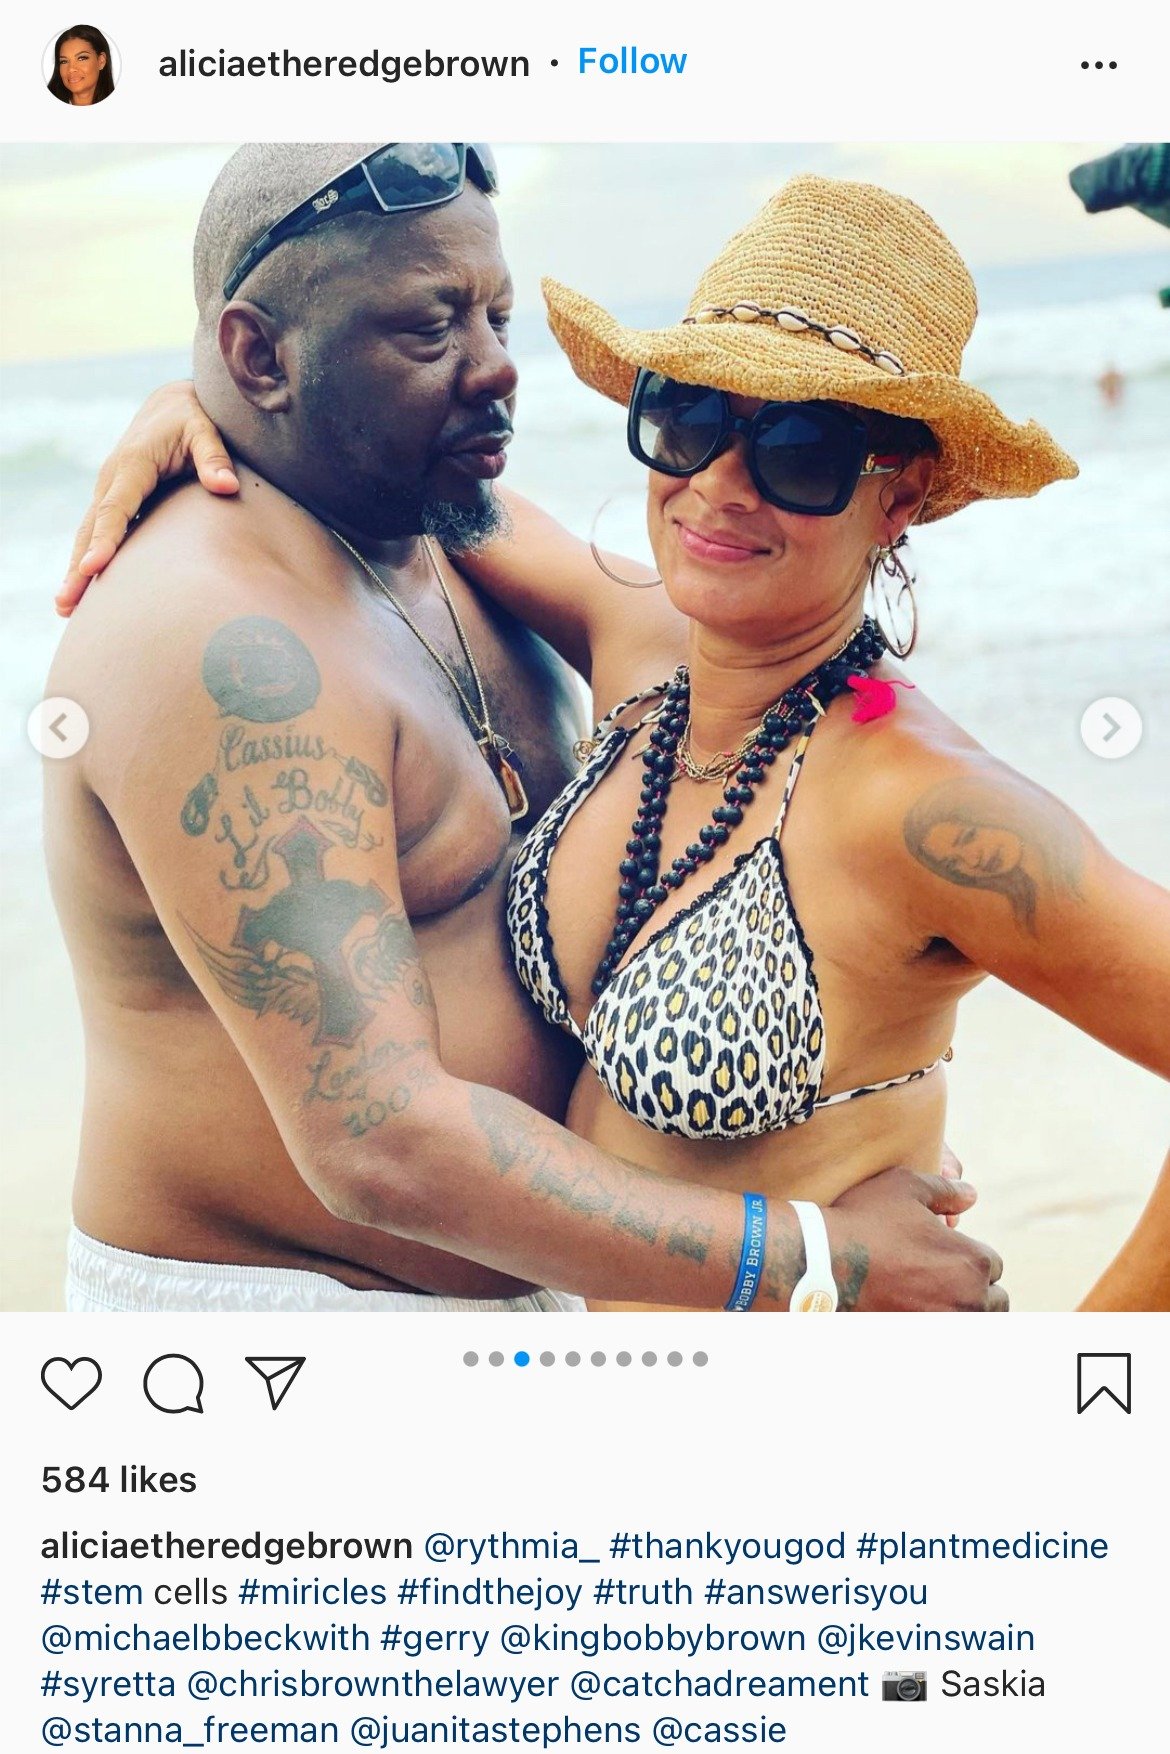 Alicia Etheredge and Bobby Brown embracing one another on the beach | Source: Instagram.com/aliciaetheredgebrown